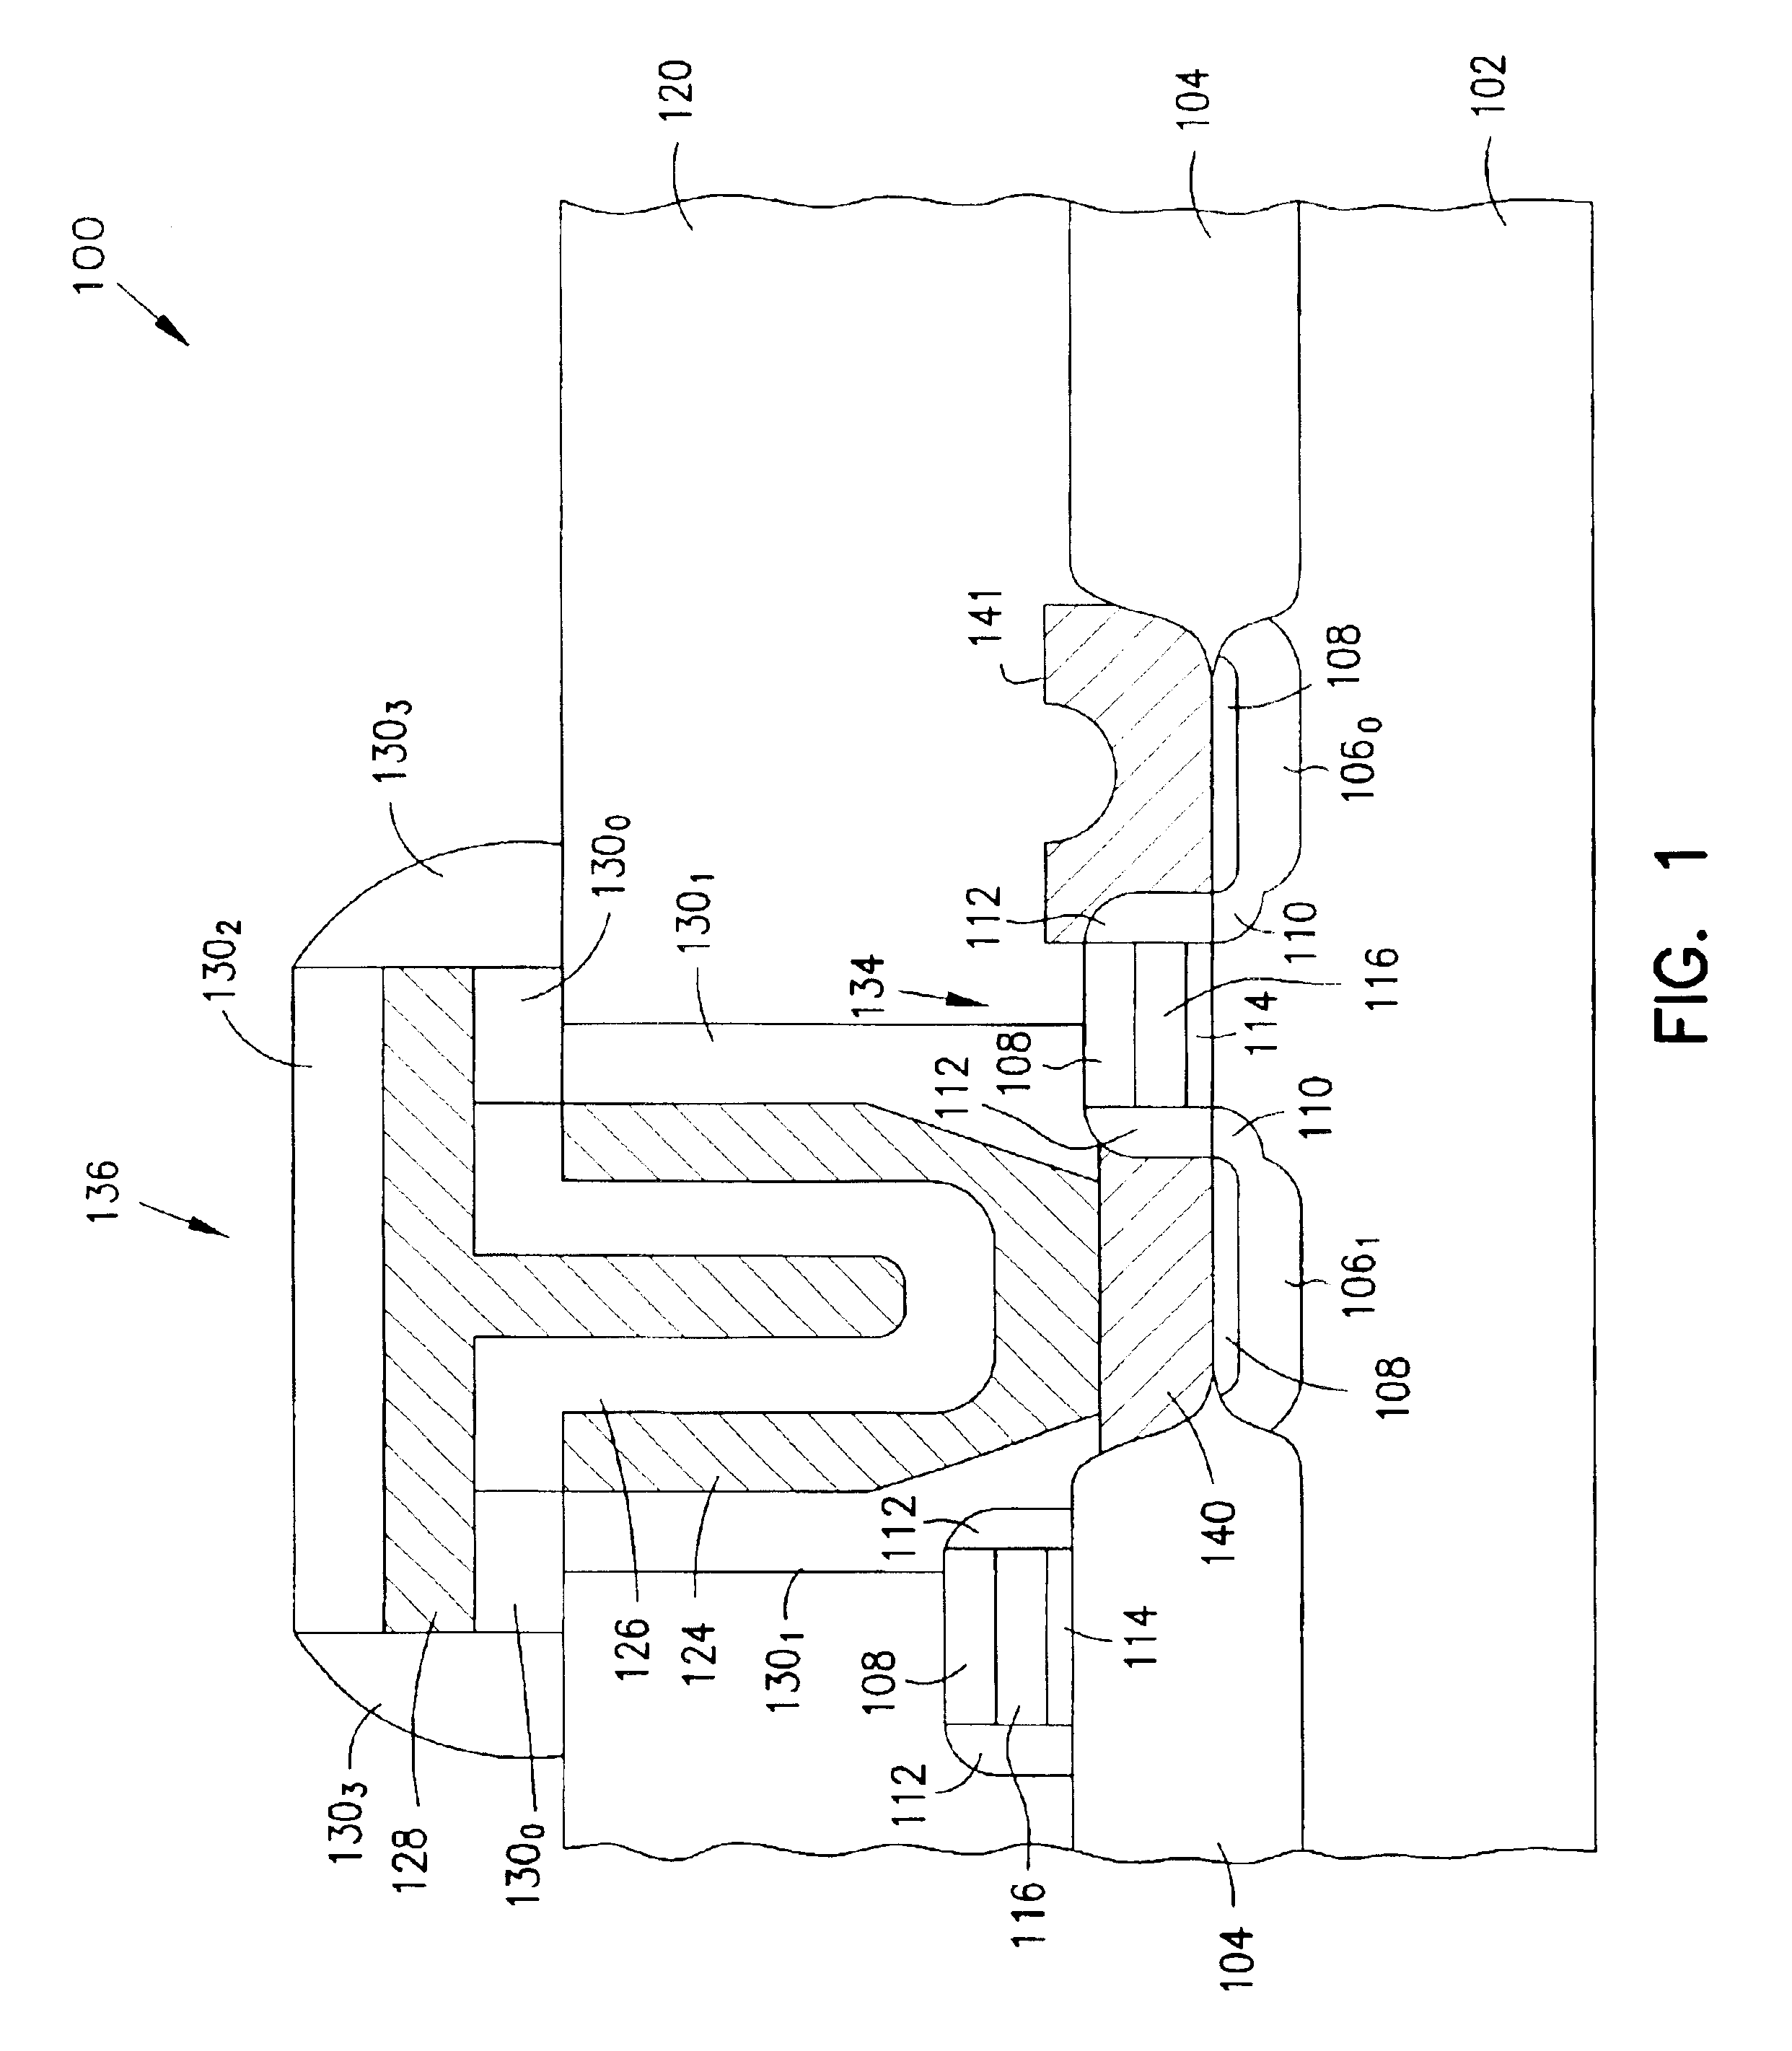 Structures and methods for enhancing capacitors in integrated circuits